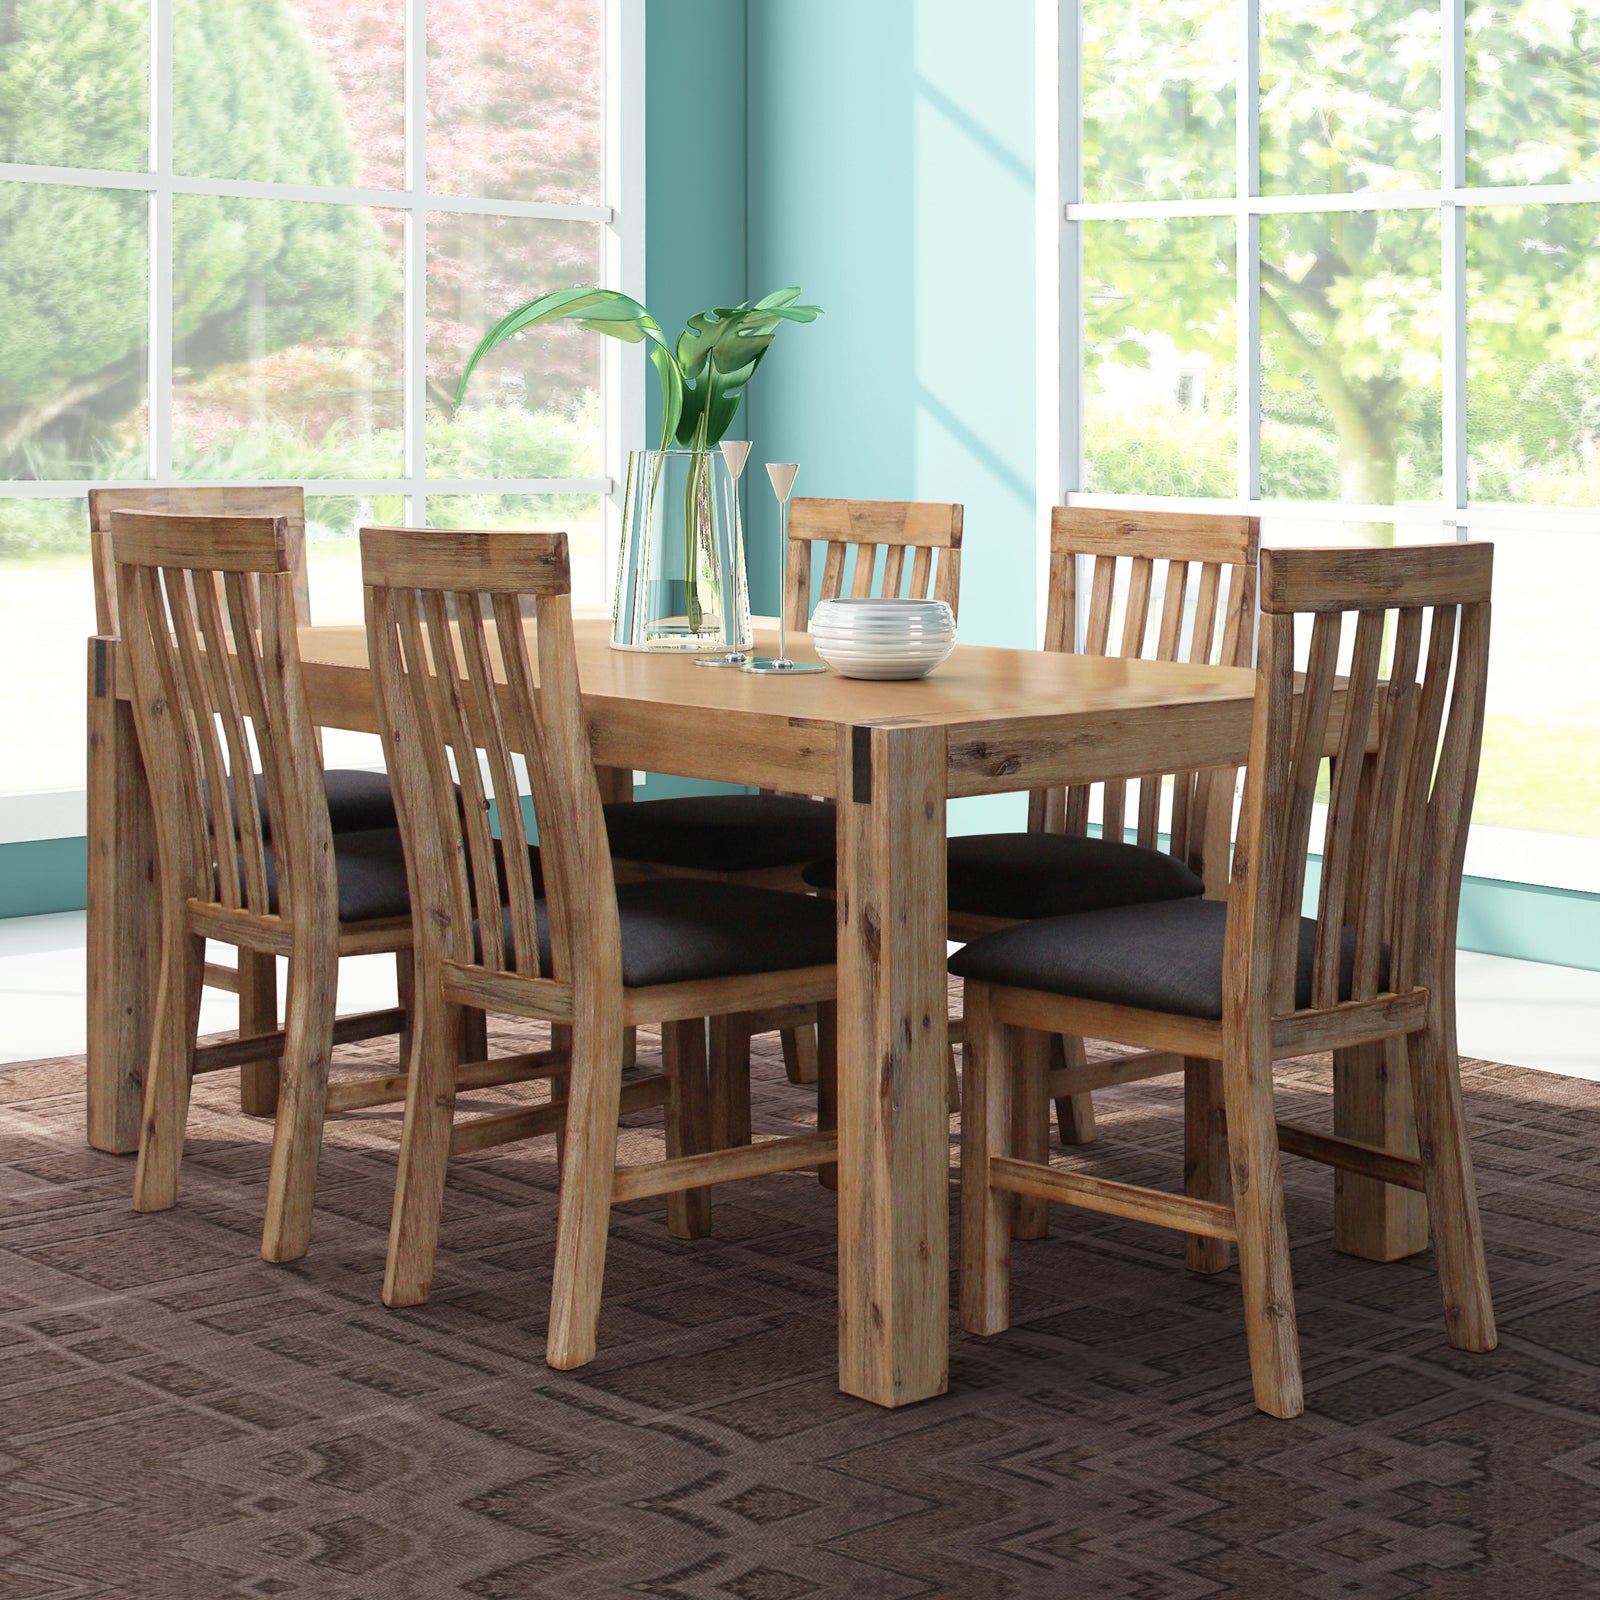 7 Pieces Dining Suite 180cm Medium Size Dining Table & 6X Chairs with Solid Acacia Wooden Base in Oak Colour - SILBERSHELL